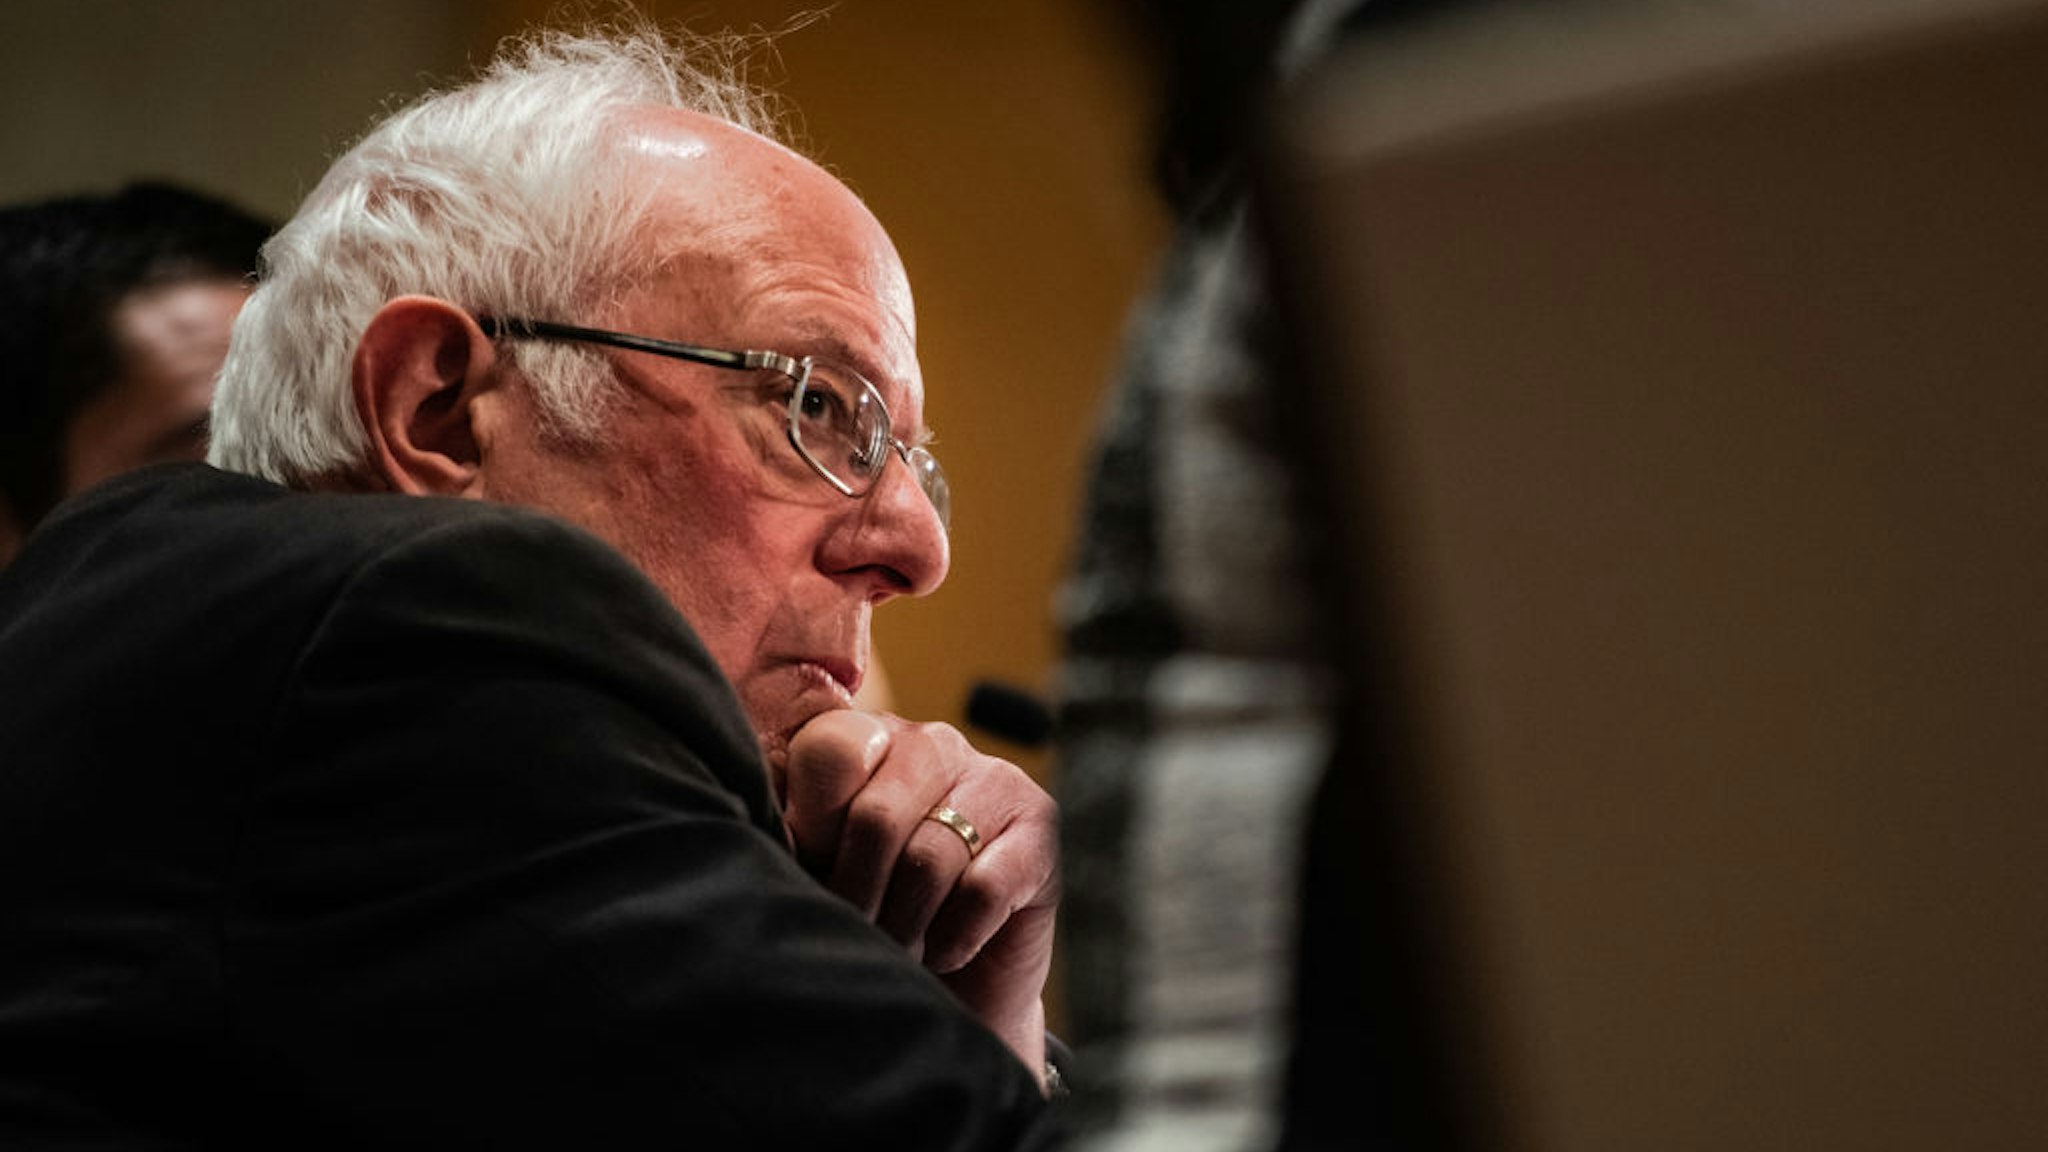 Sen. Bernie Sanders, I-Vt., U.S. 2020 Democratic Presidential Candidate listens during the Coronavirus Public Health roundtable press conference at Westing Detroit Metropolitan Airport on Monday, March 9, 2020 in Romulus, MI. (Photo by Salwan Georges/The Washington Post via Getty Images)